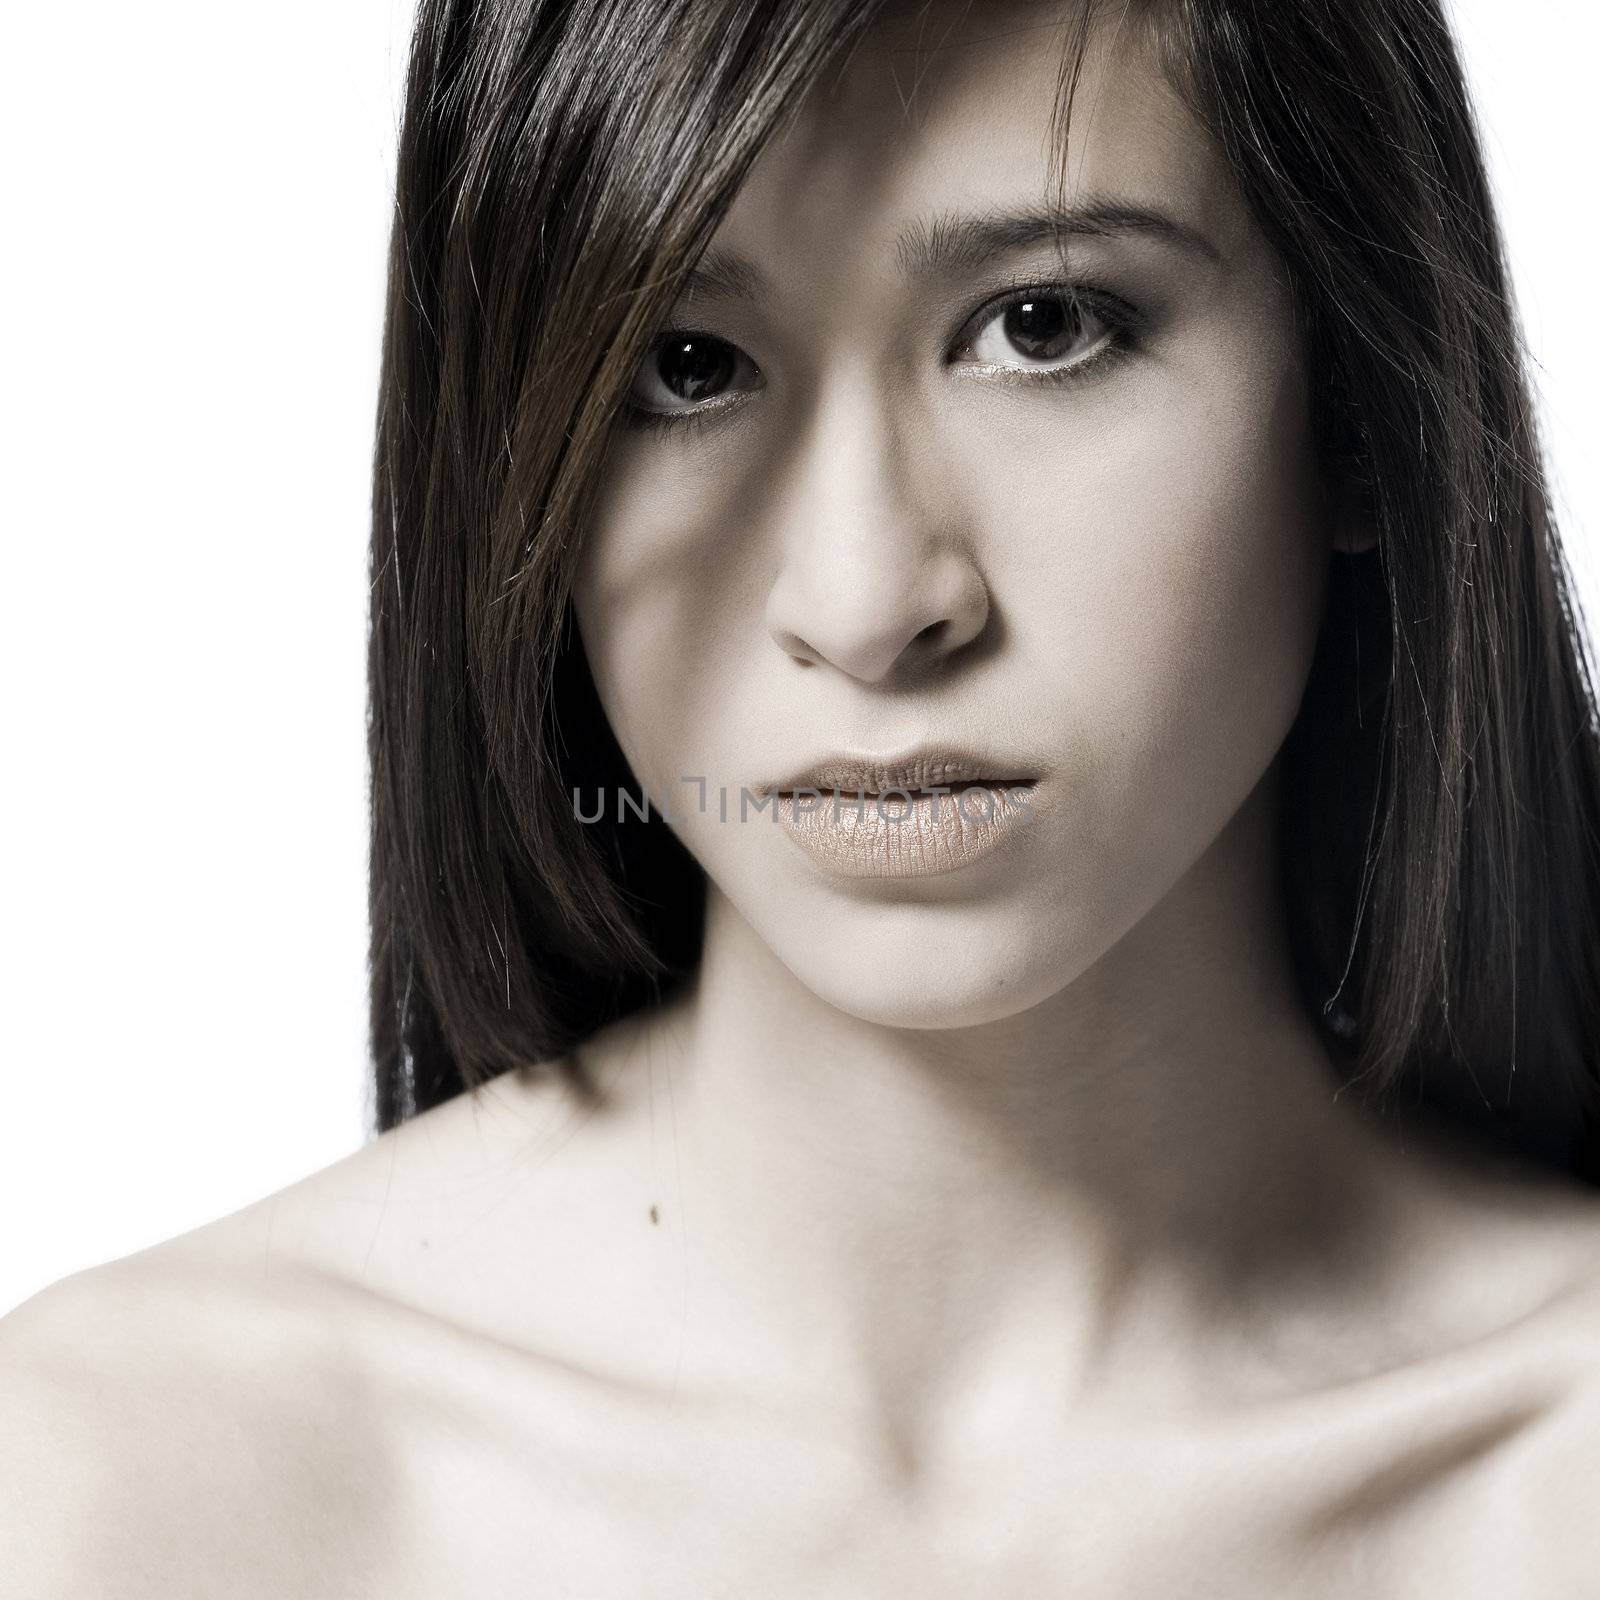 Studio portrait of a beautiful mixed race, vietnamese girl with an angry look